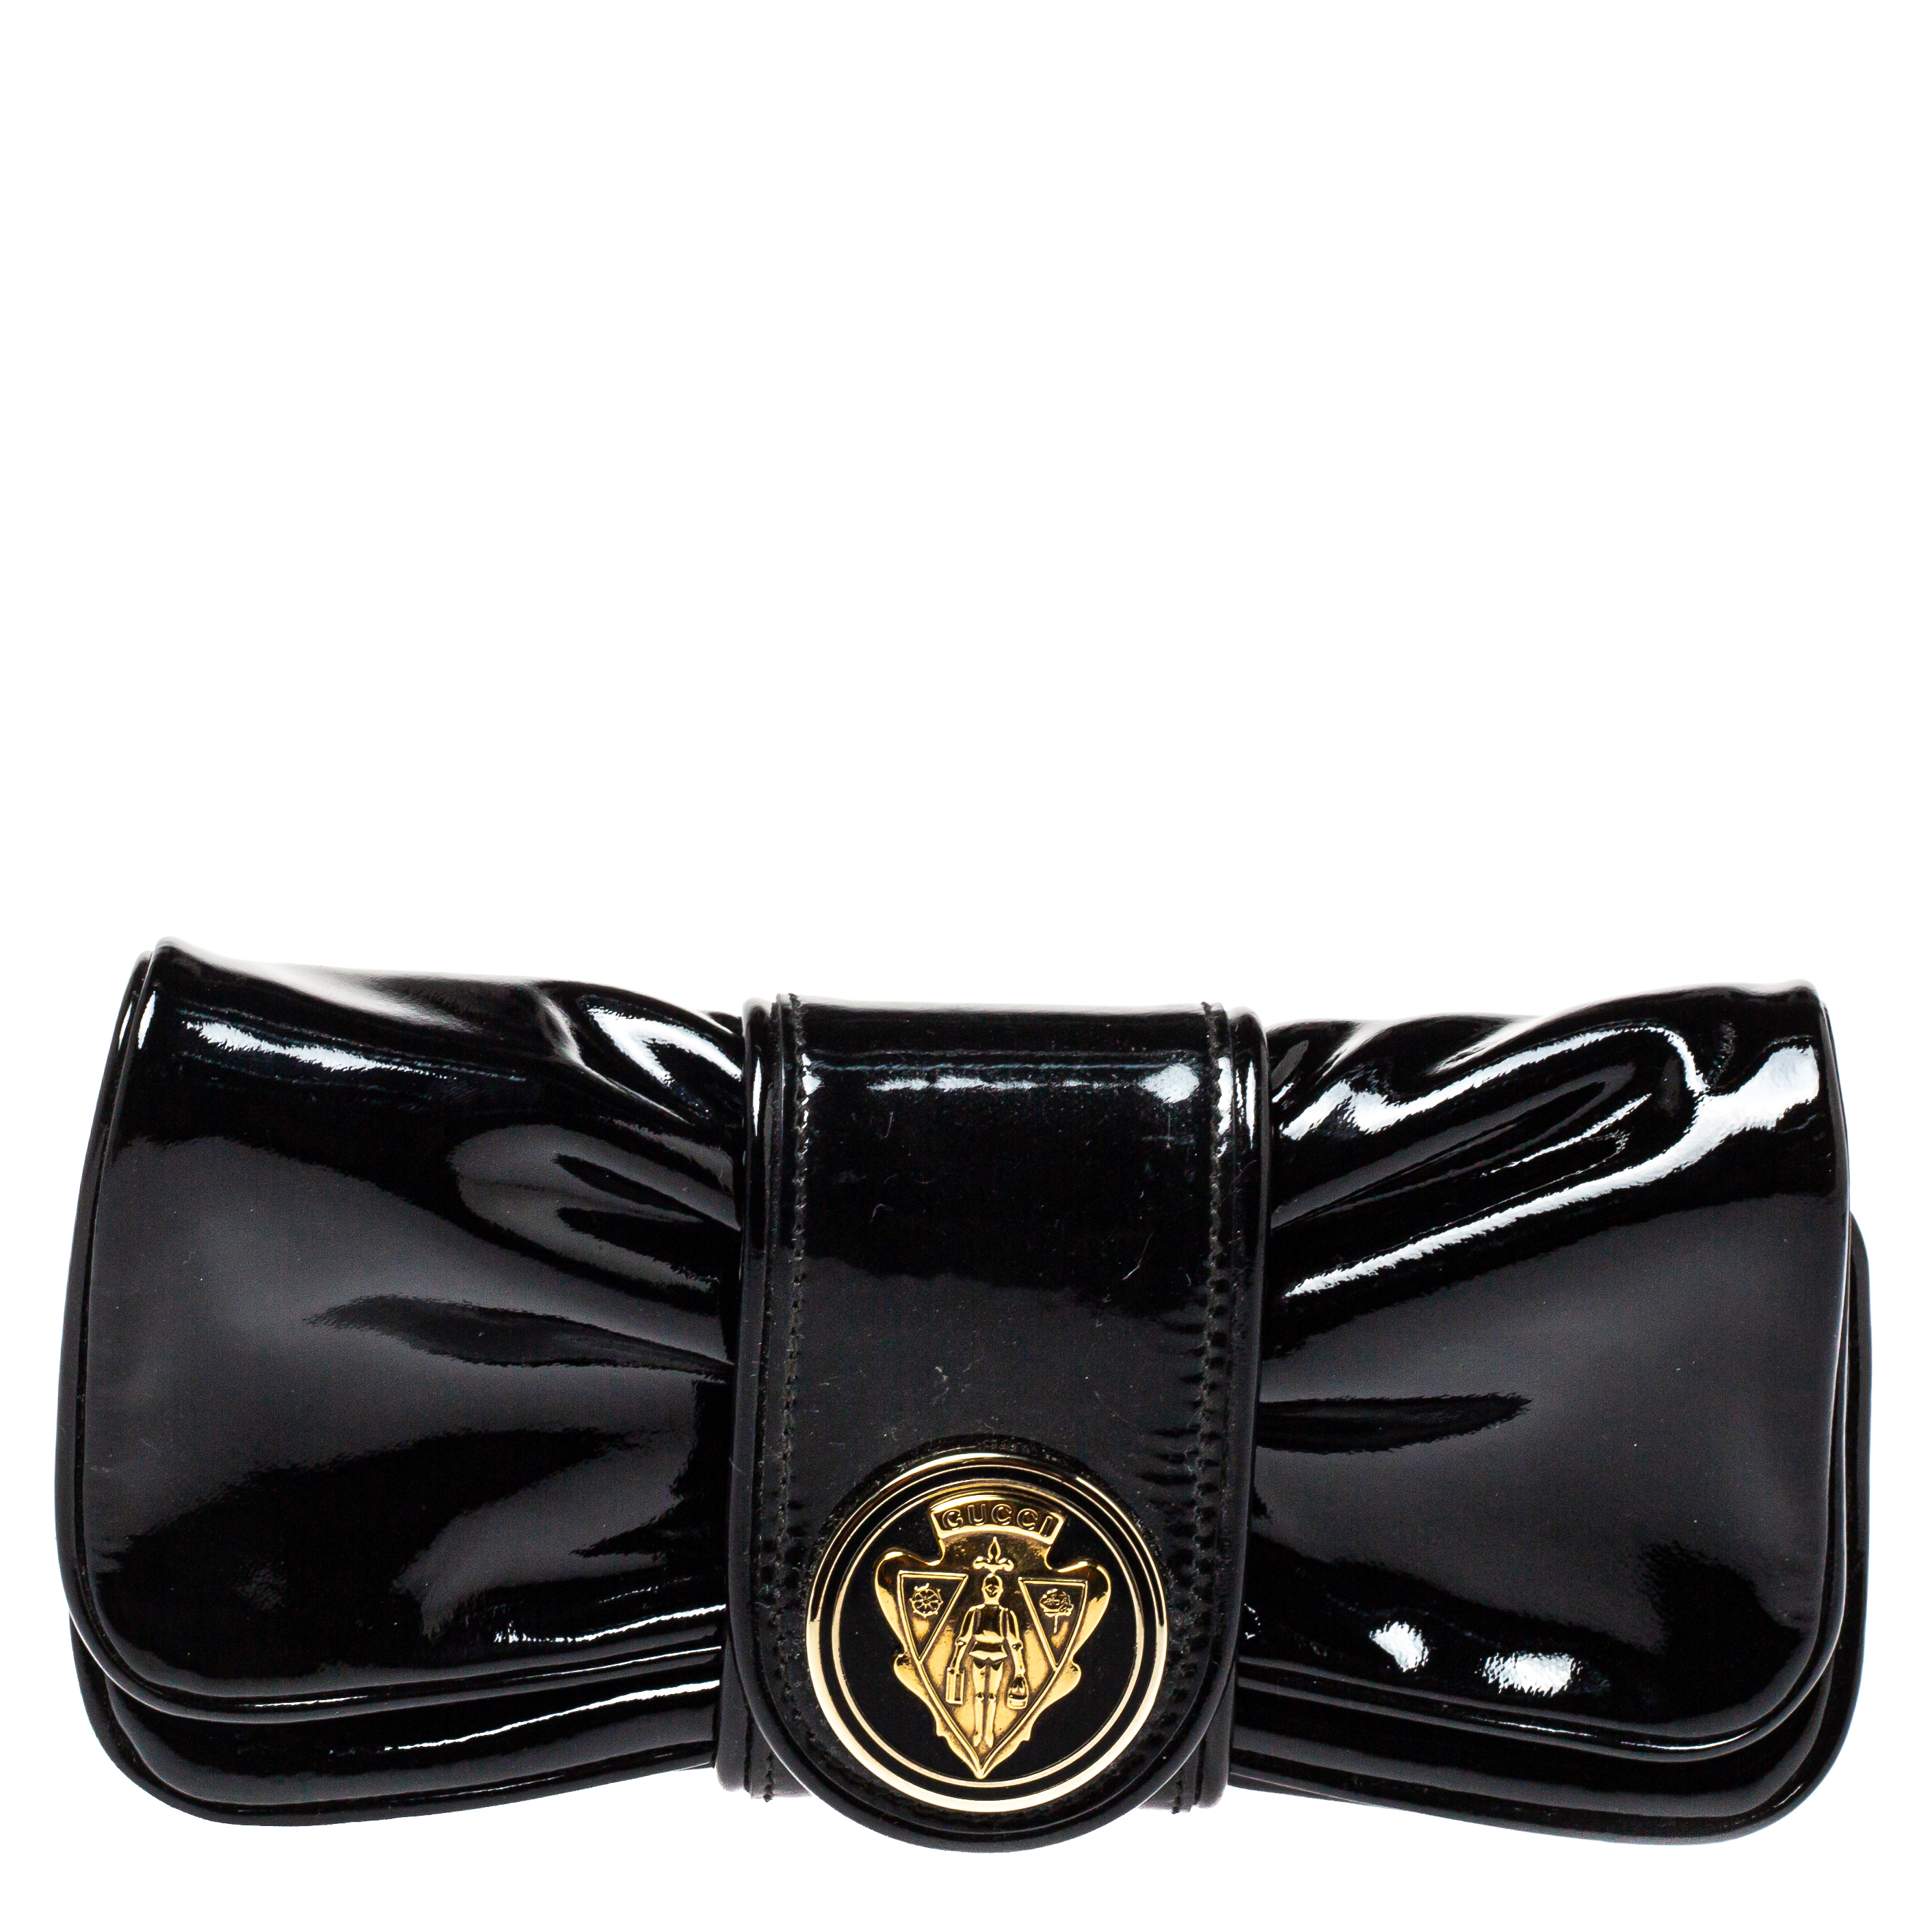 Pre-owned Gucci Black Patent Leather Hysteria Clutch